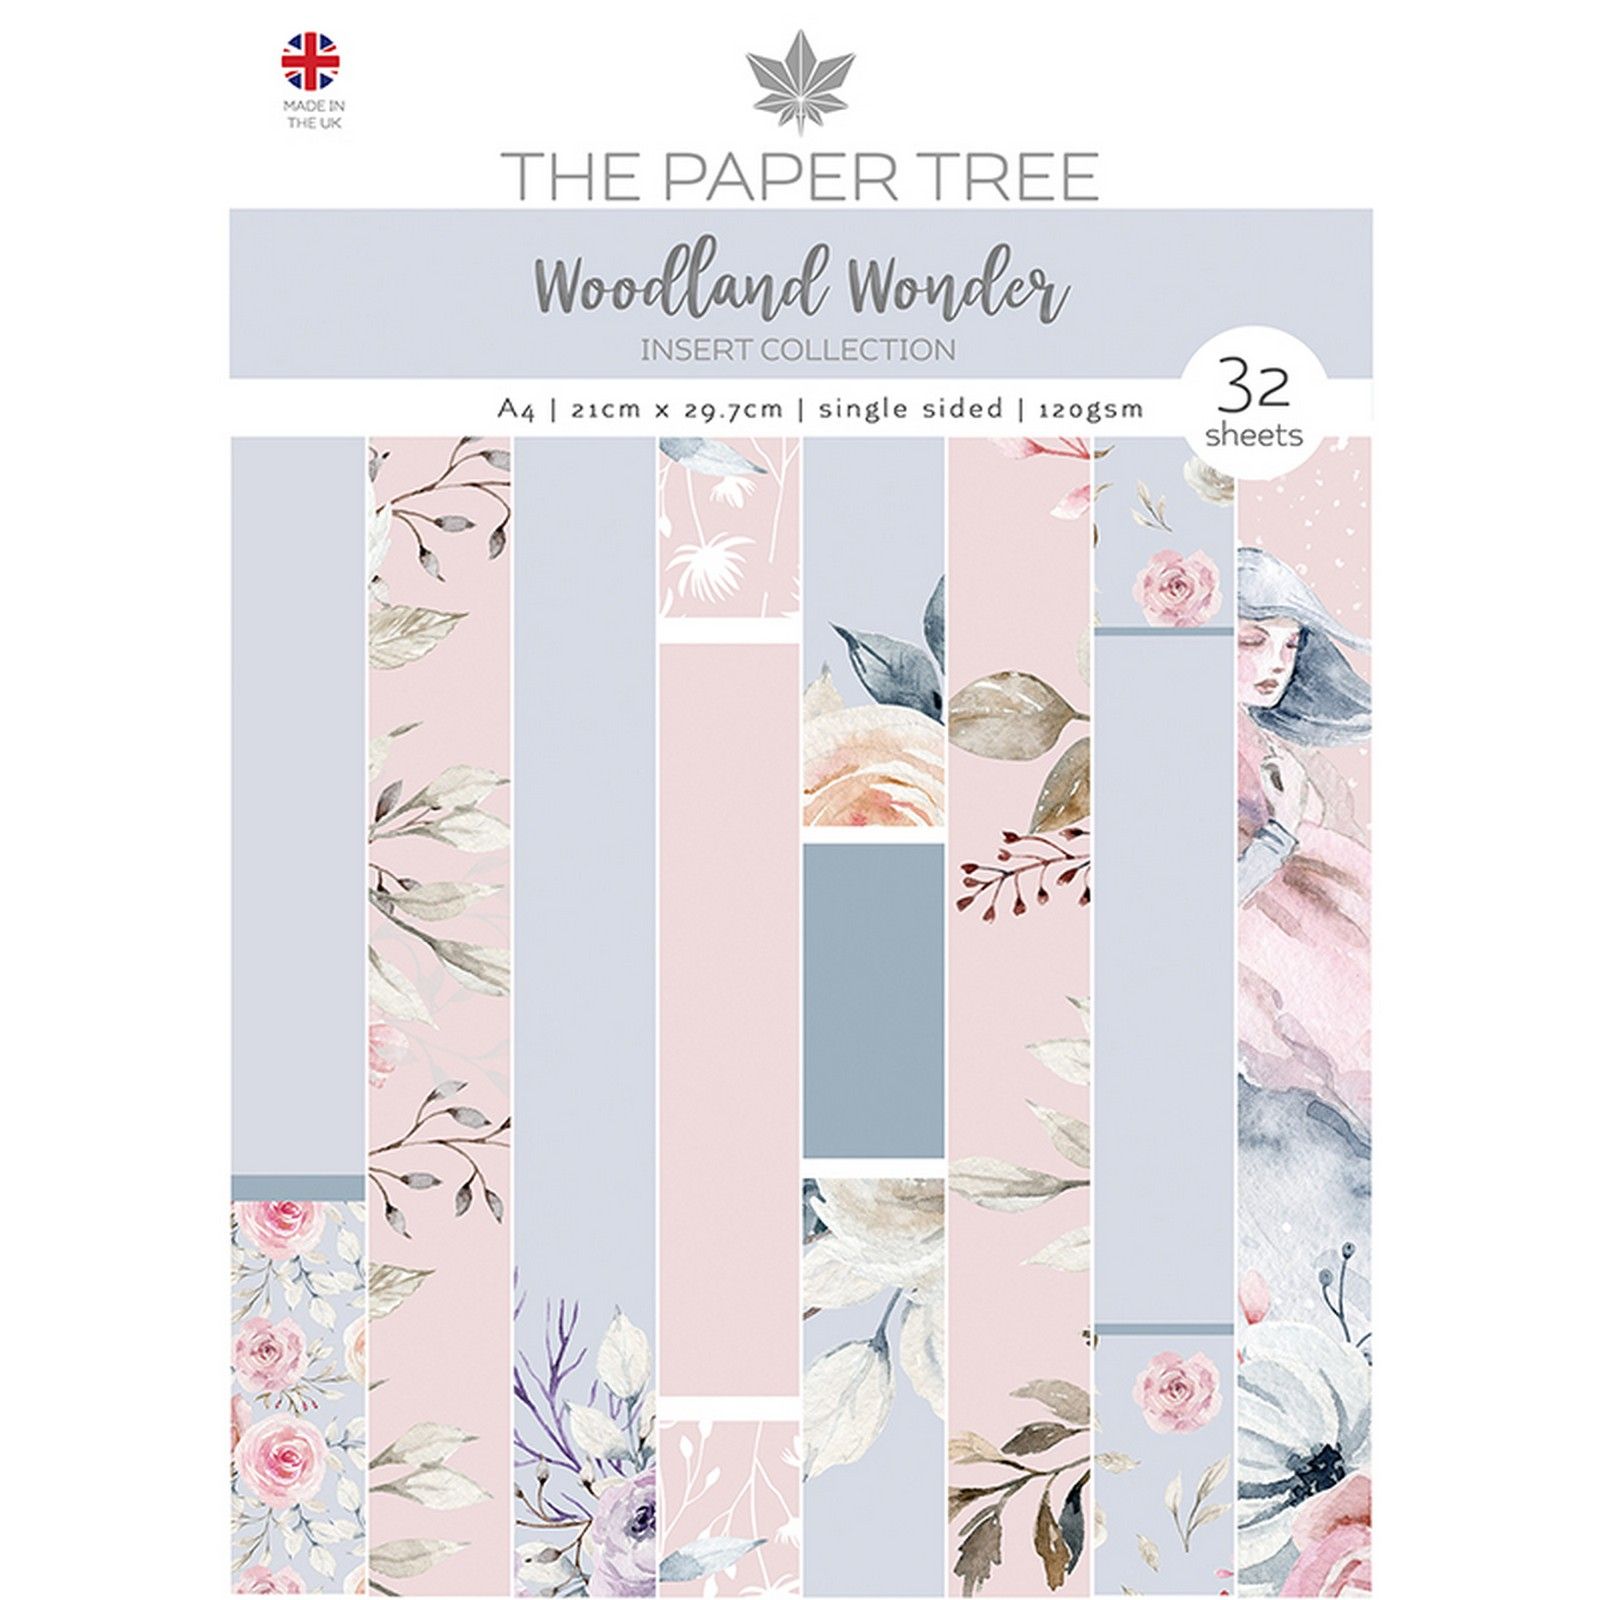 The Paper Tree • Woodland wonder Insert collection